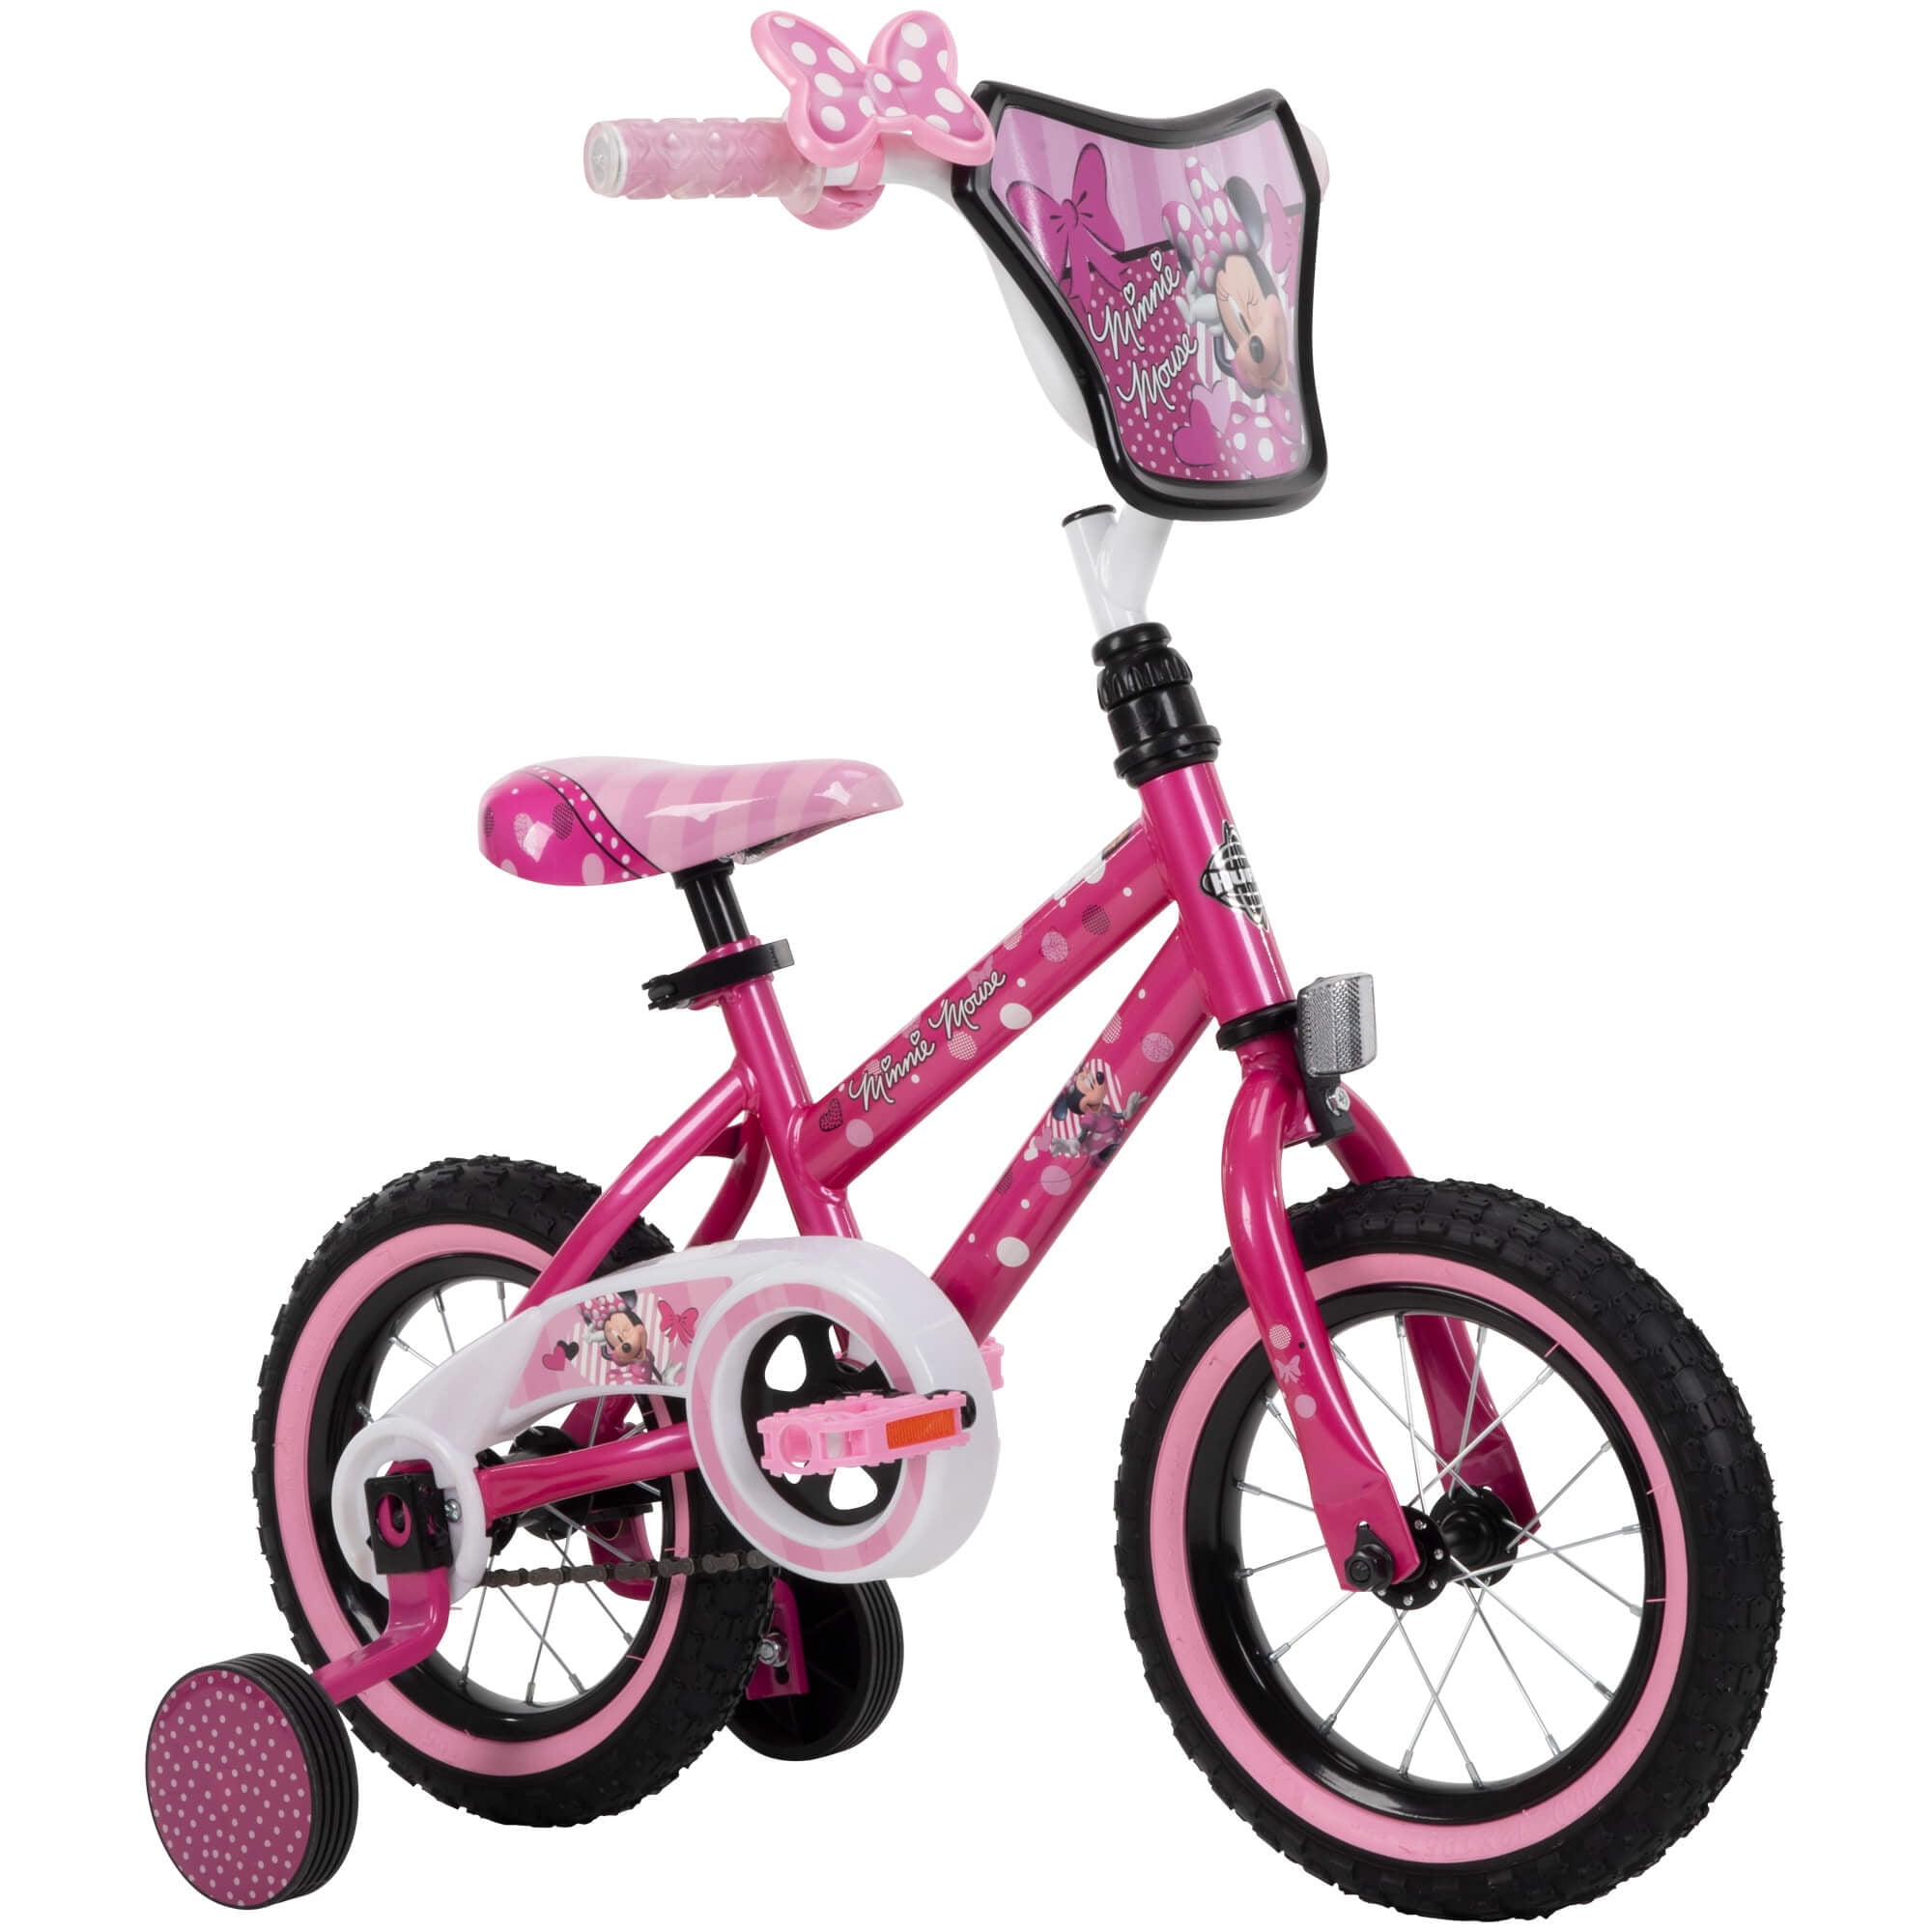 Huffy Disney Minnie Mouse Girls Bike Kids Bicycle With Handlebar Pad 12" Pink for sale online 